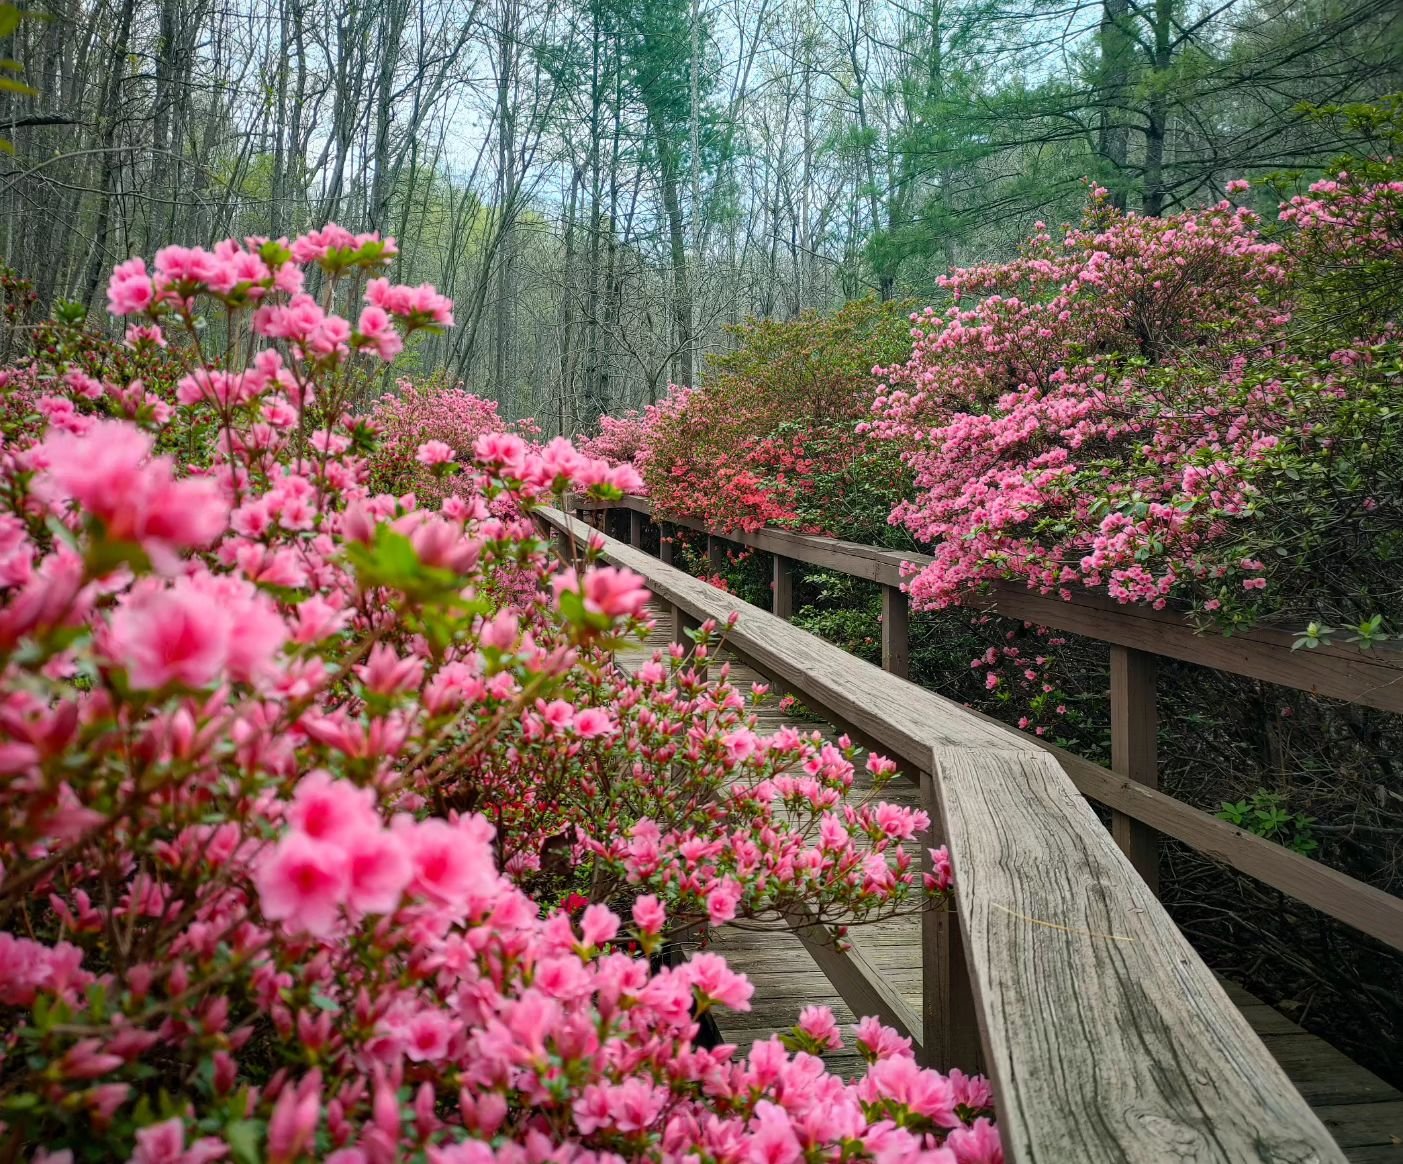 The stunning pinks and fuschias of azalea season in #roanoke 😲

This shot was taken at a sleepy little spot in the mountains Spring in the Blue Ridge Mountains is magical, indeed.

Happy friday, y'all ✌️
.
.
.
.
.
.
#azaleas #flowerstagram #springfl